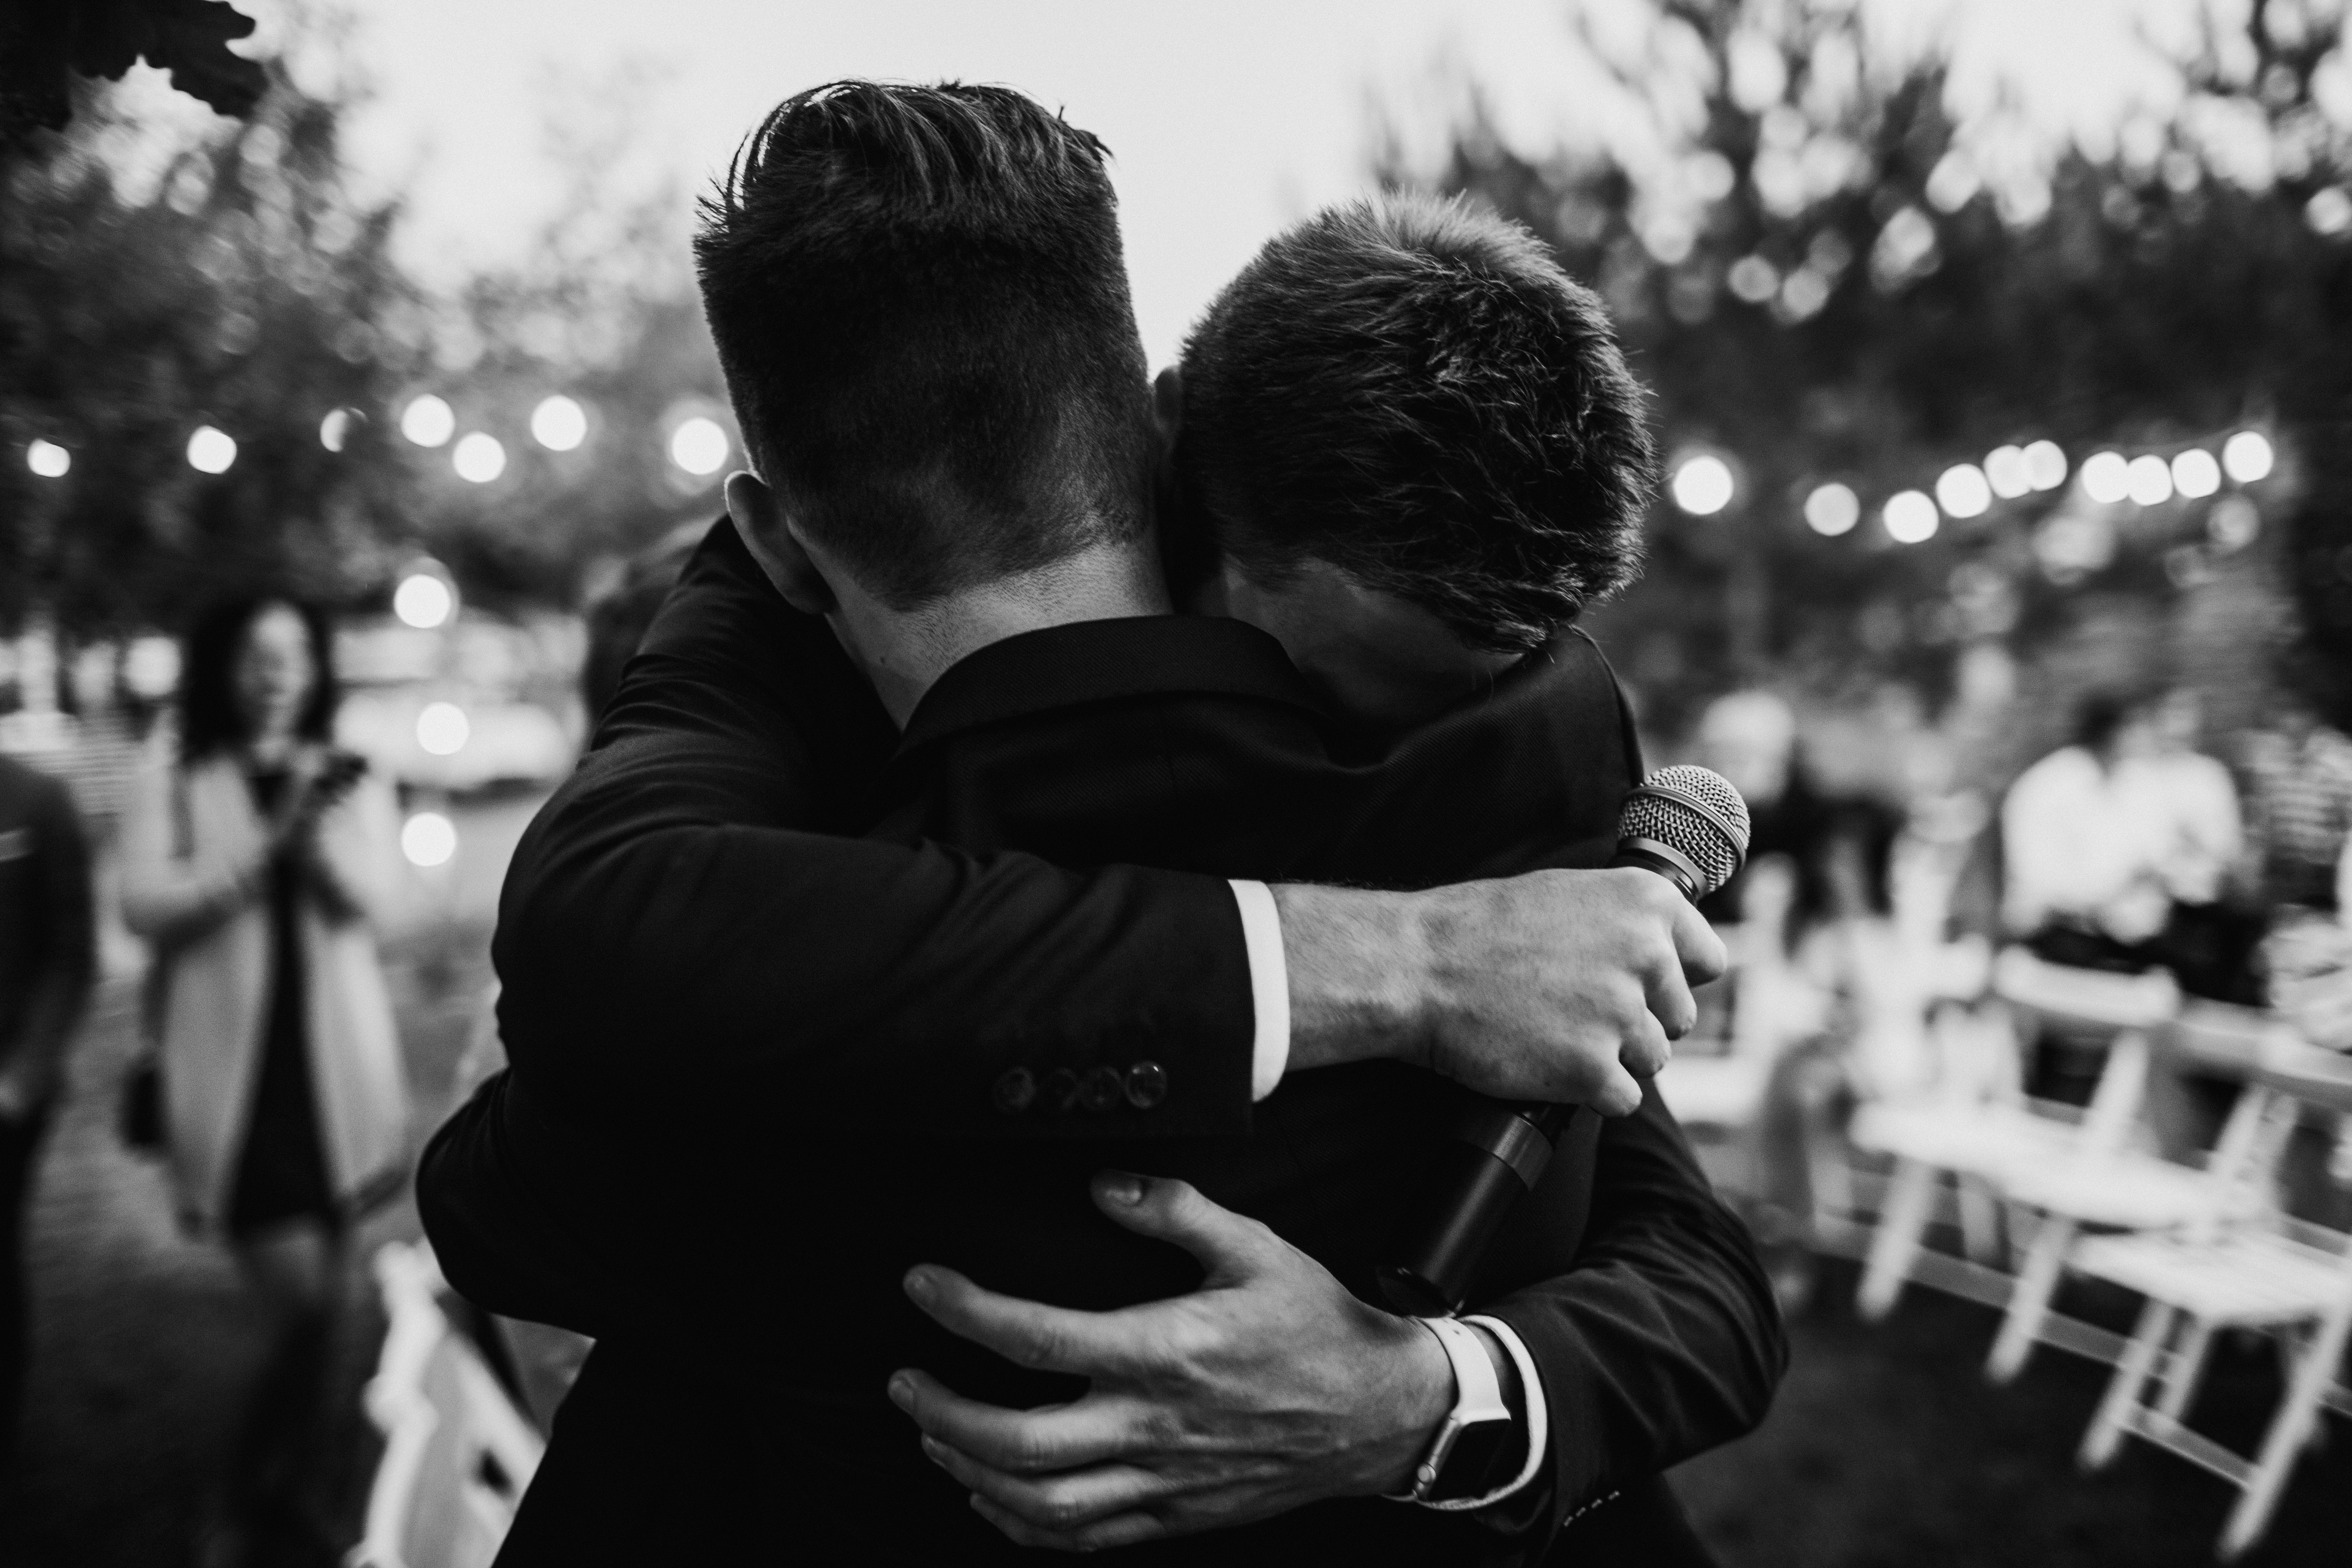 A groom hugs his brother | Source: Shutterstock